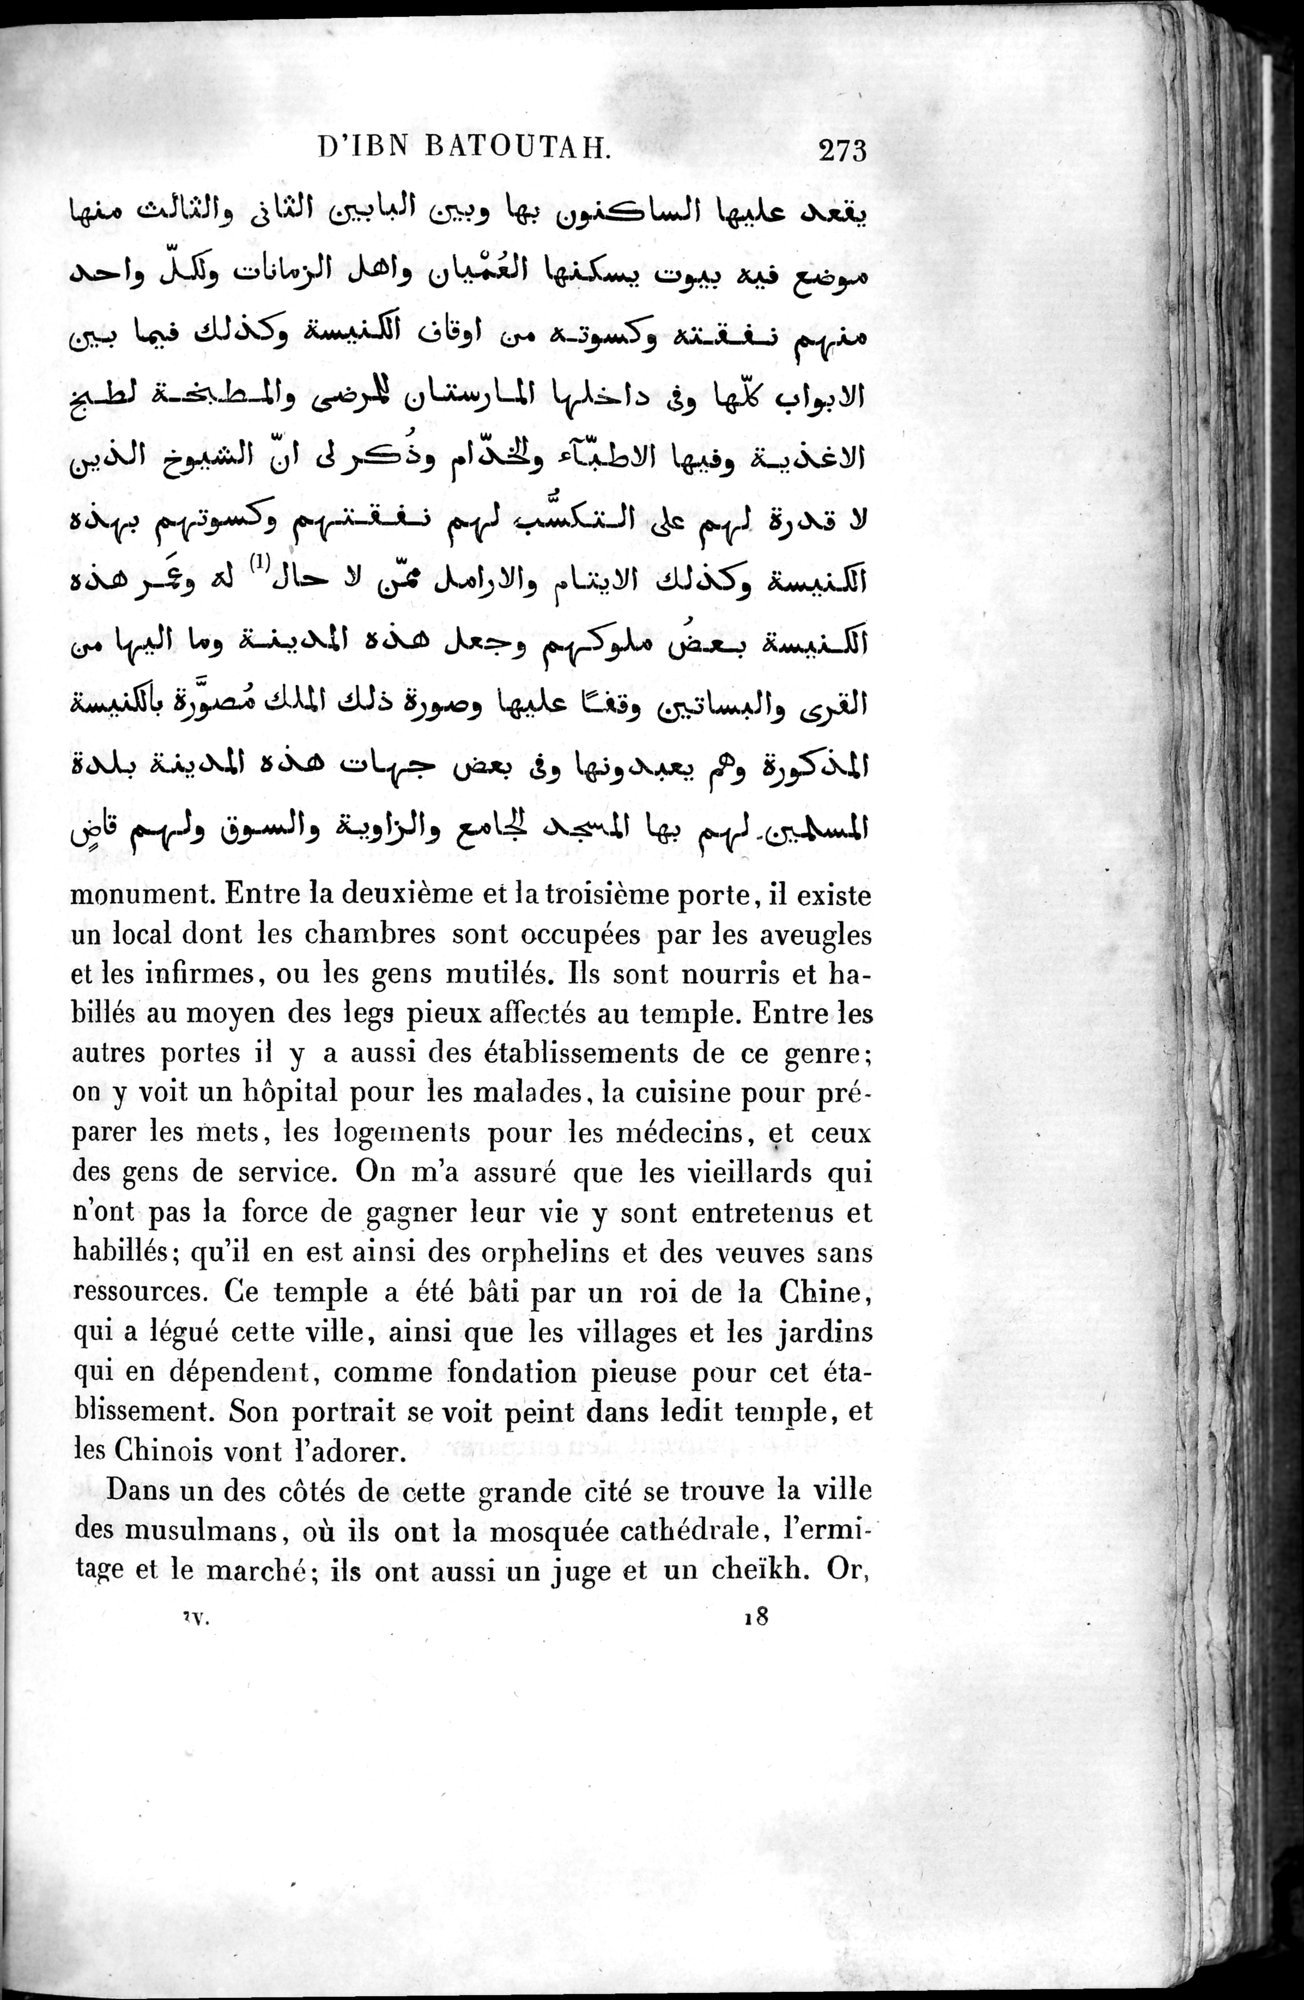 Voyages d'Ibn Batoutah : vol.4 / Page 285 (Grayscale High Resolution Image)